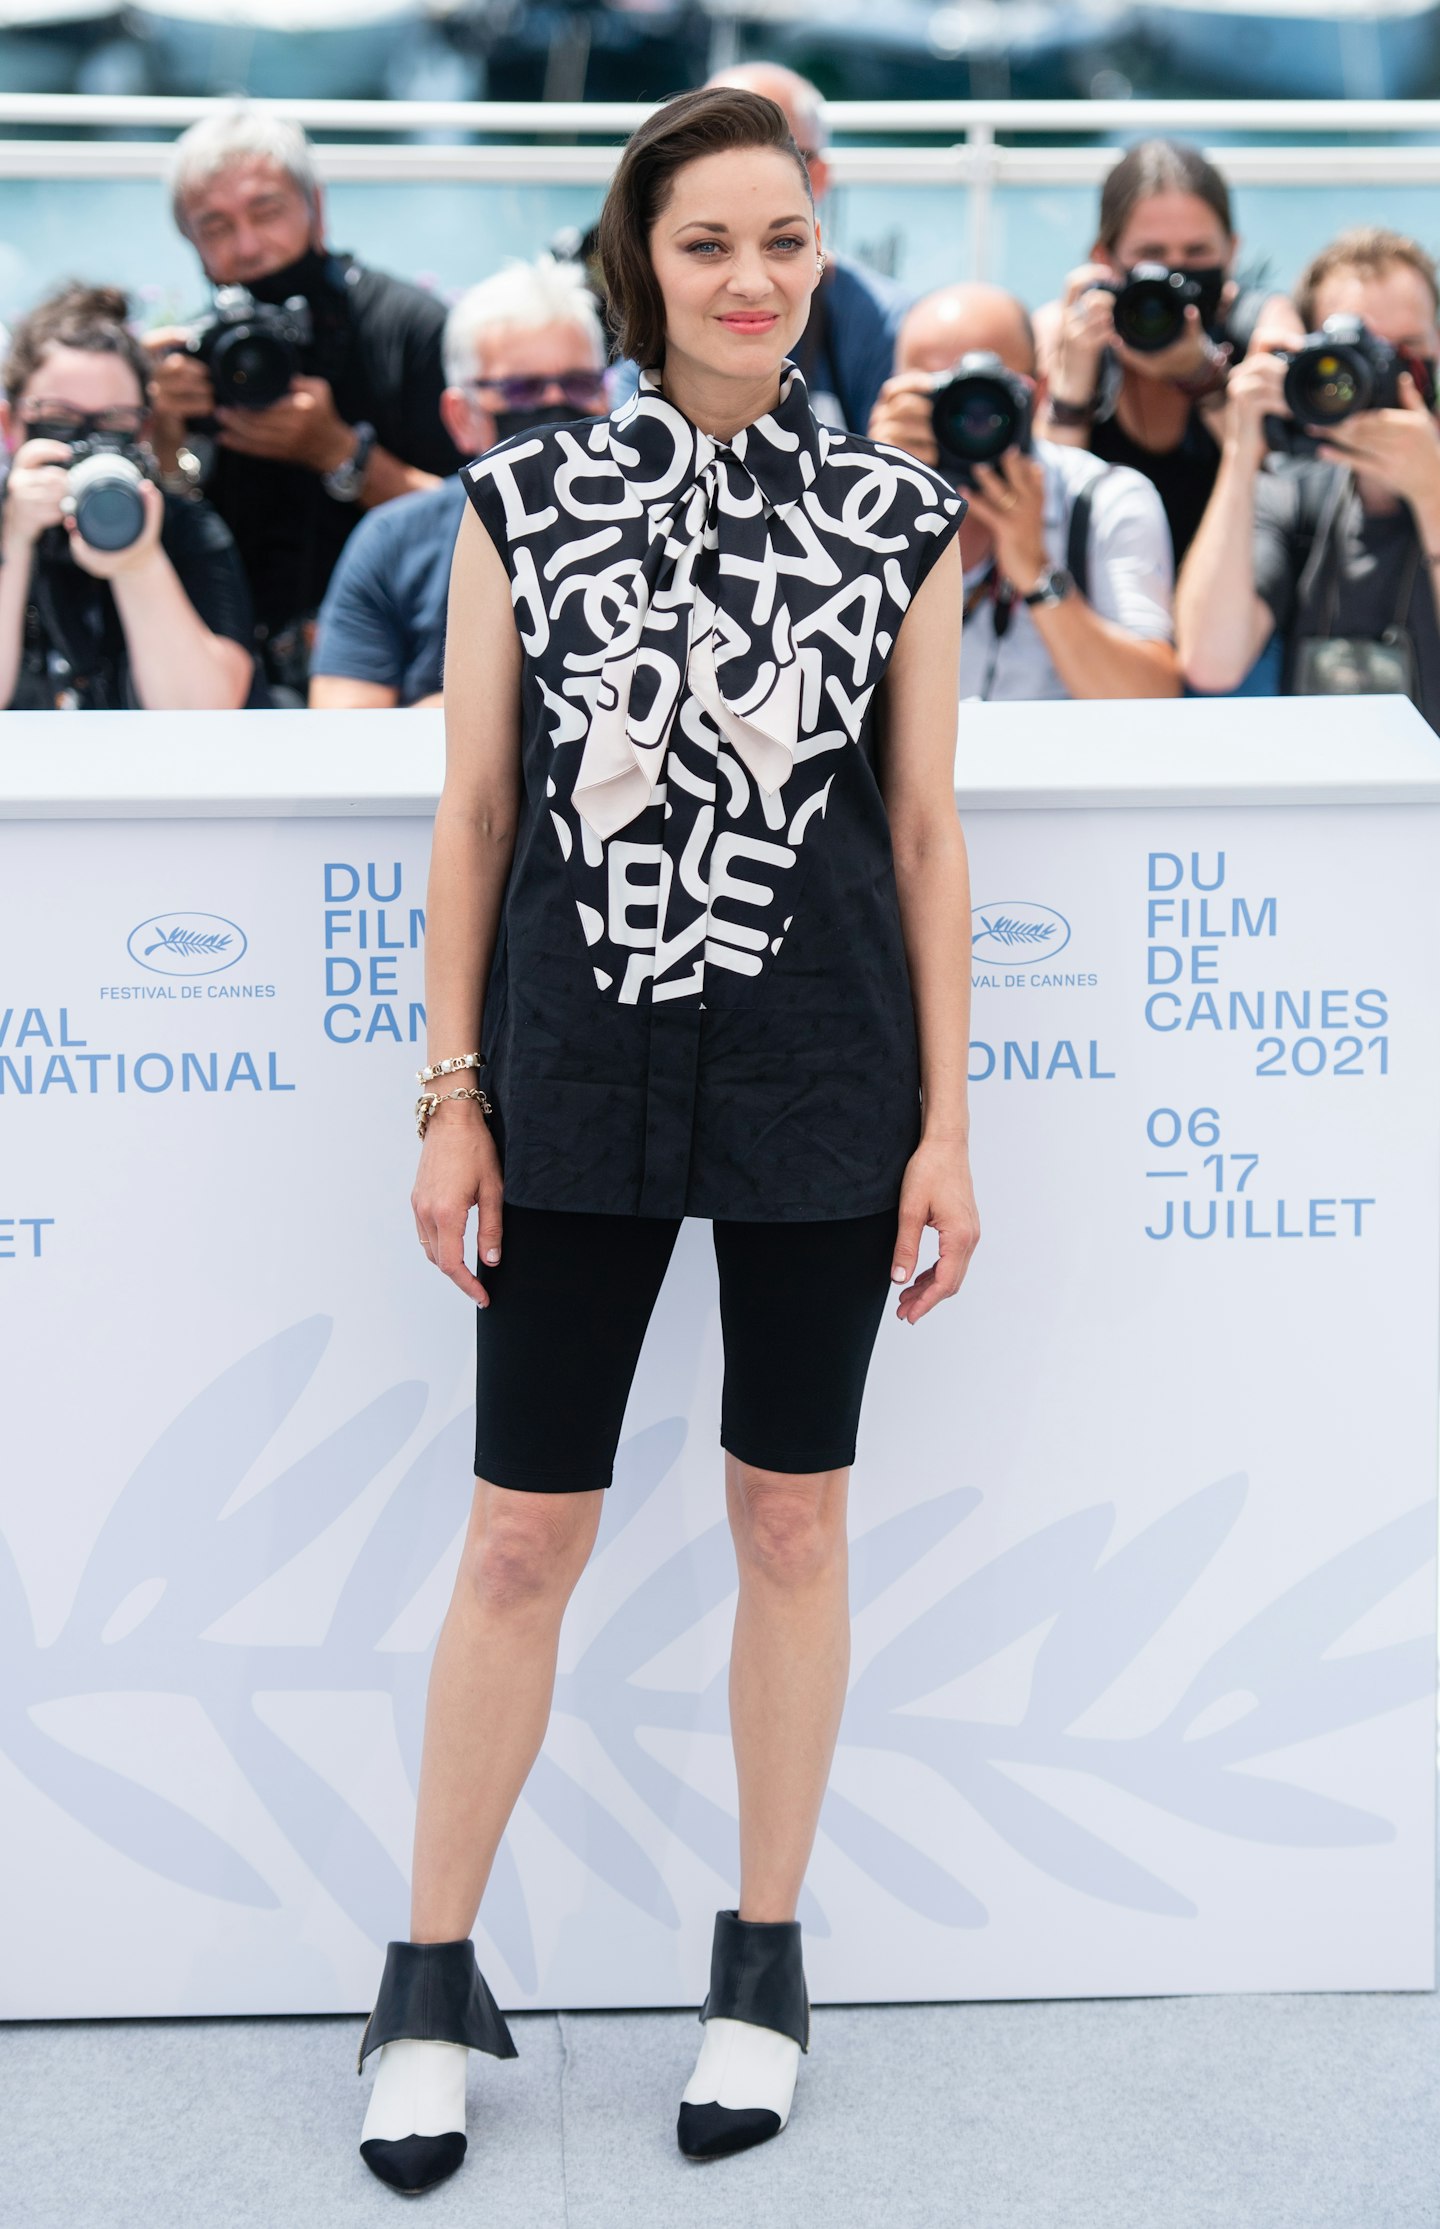 Marion Cotillard wore a full Chanel look for a photocall, consisting of cycling shorts and a printed blouse